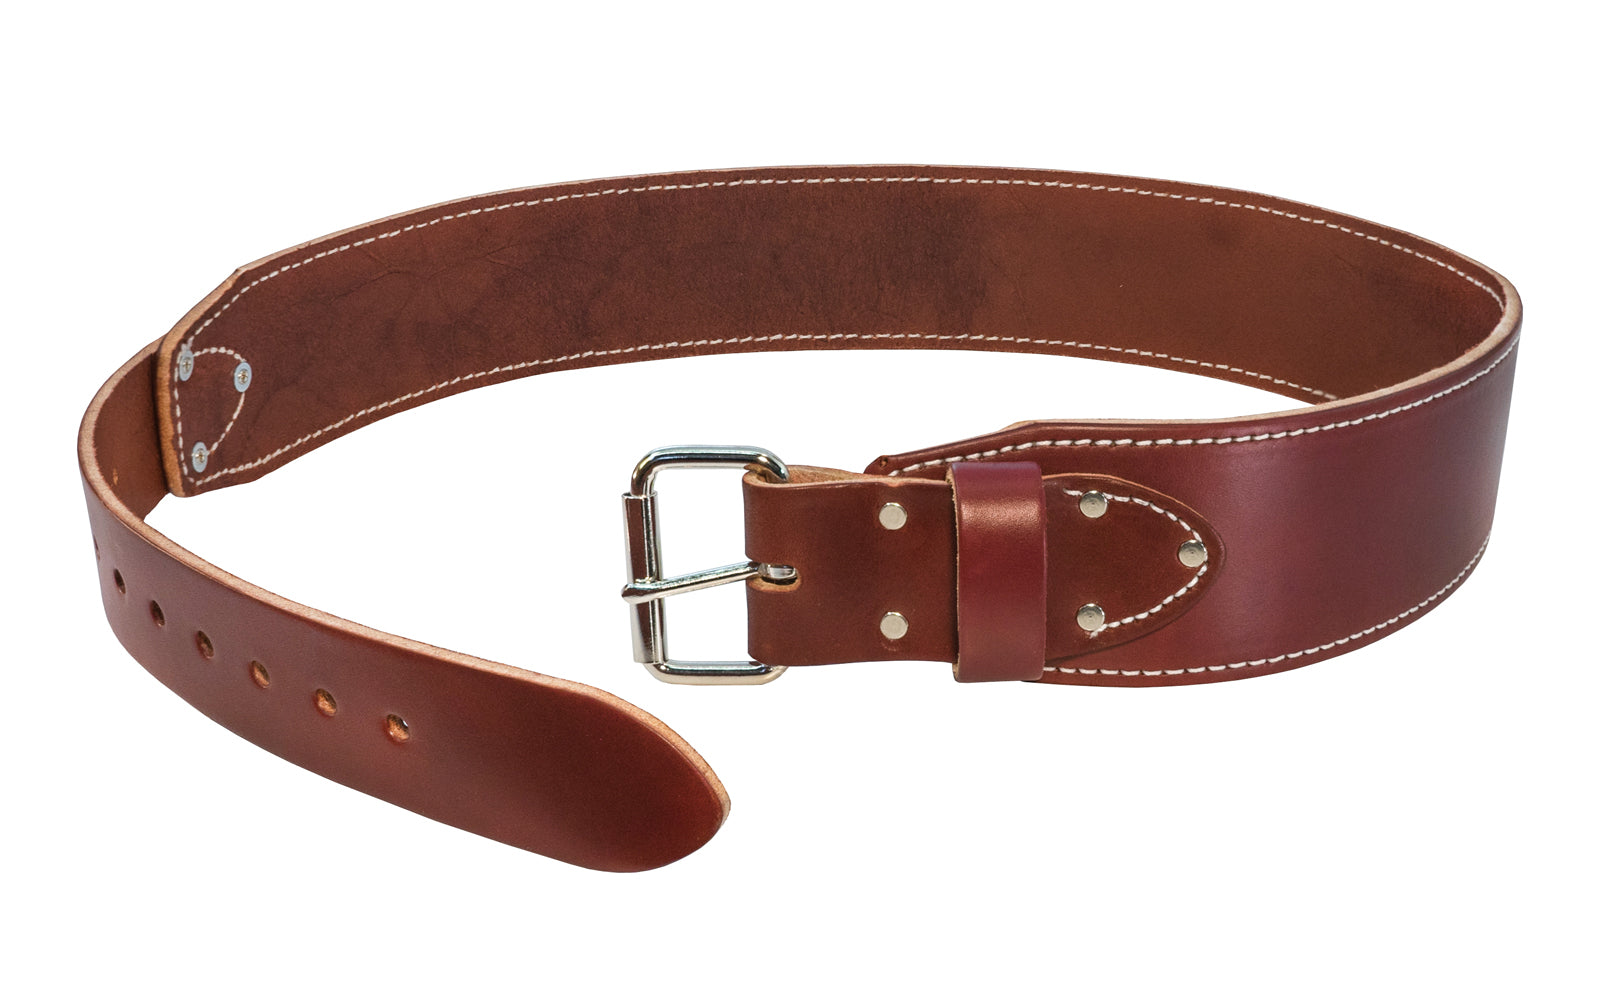 Occidental Leather Large HD Ranger Work Belt ~ Model 5035L - Made of genuine leather - Made in USA  - 759244084801 - LG Occidental Belt - Leather Work Belt - 3" wide - Large Buckle - high quality 12-14 oz bridle leather - Edge stitched for quality, appearance & strength - 5035 LG - Ranger - 41" Mid range - 48" Length